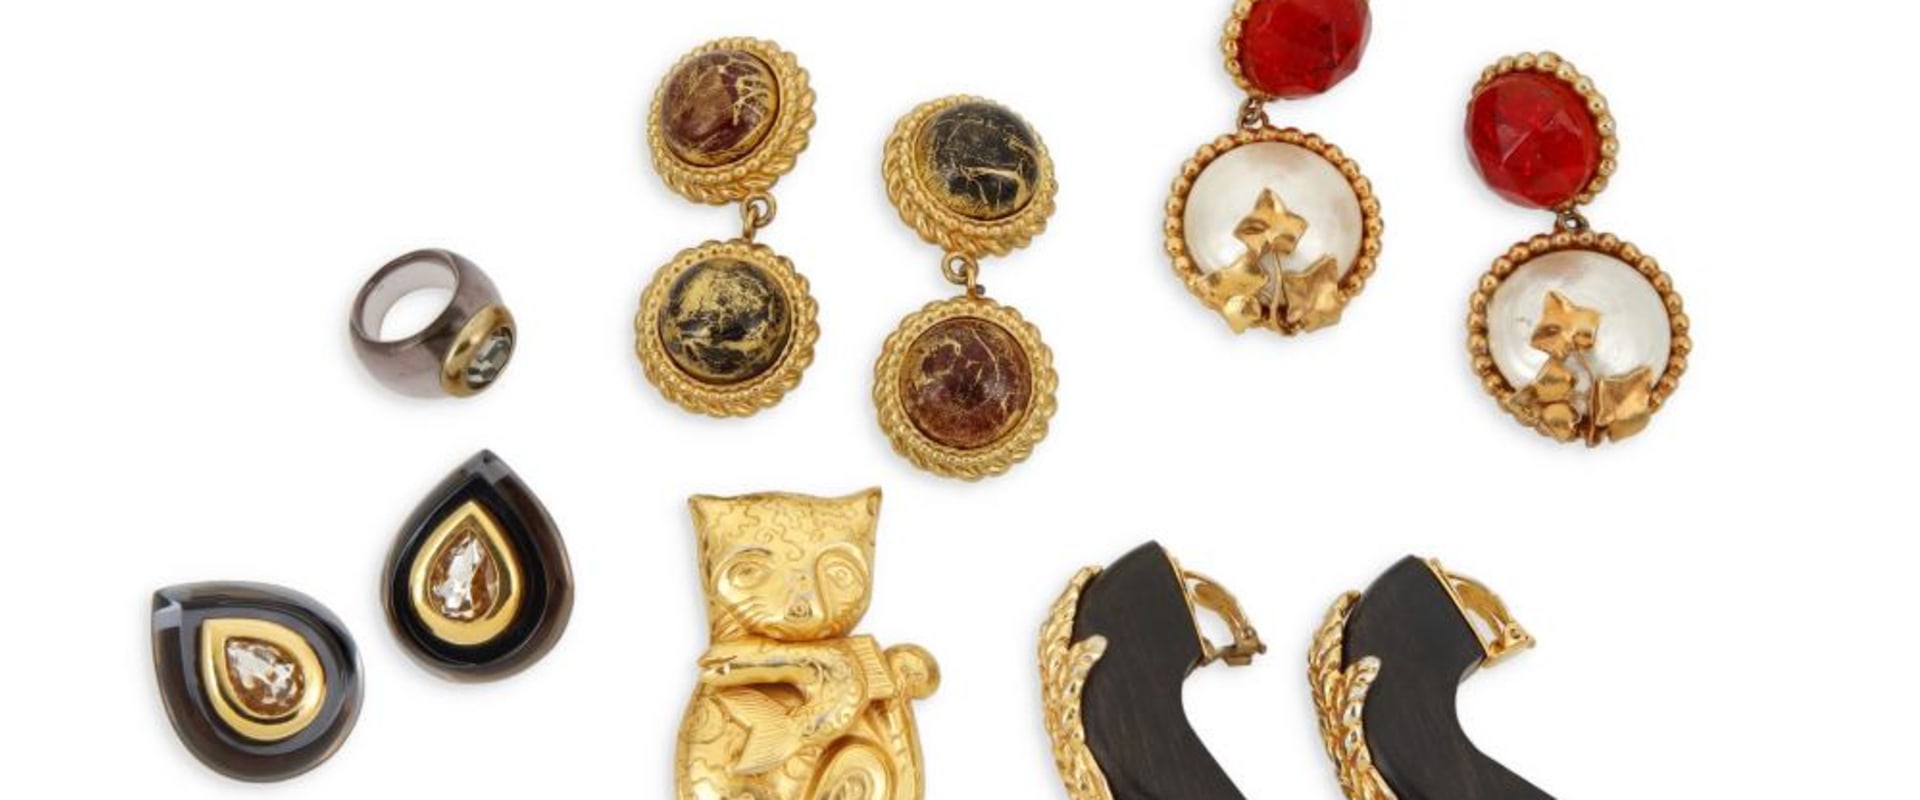 Statement Jewellery: A Comprehensive Overview